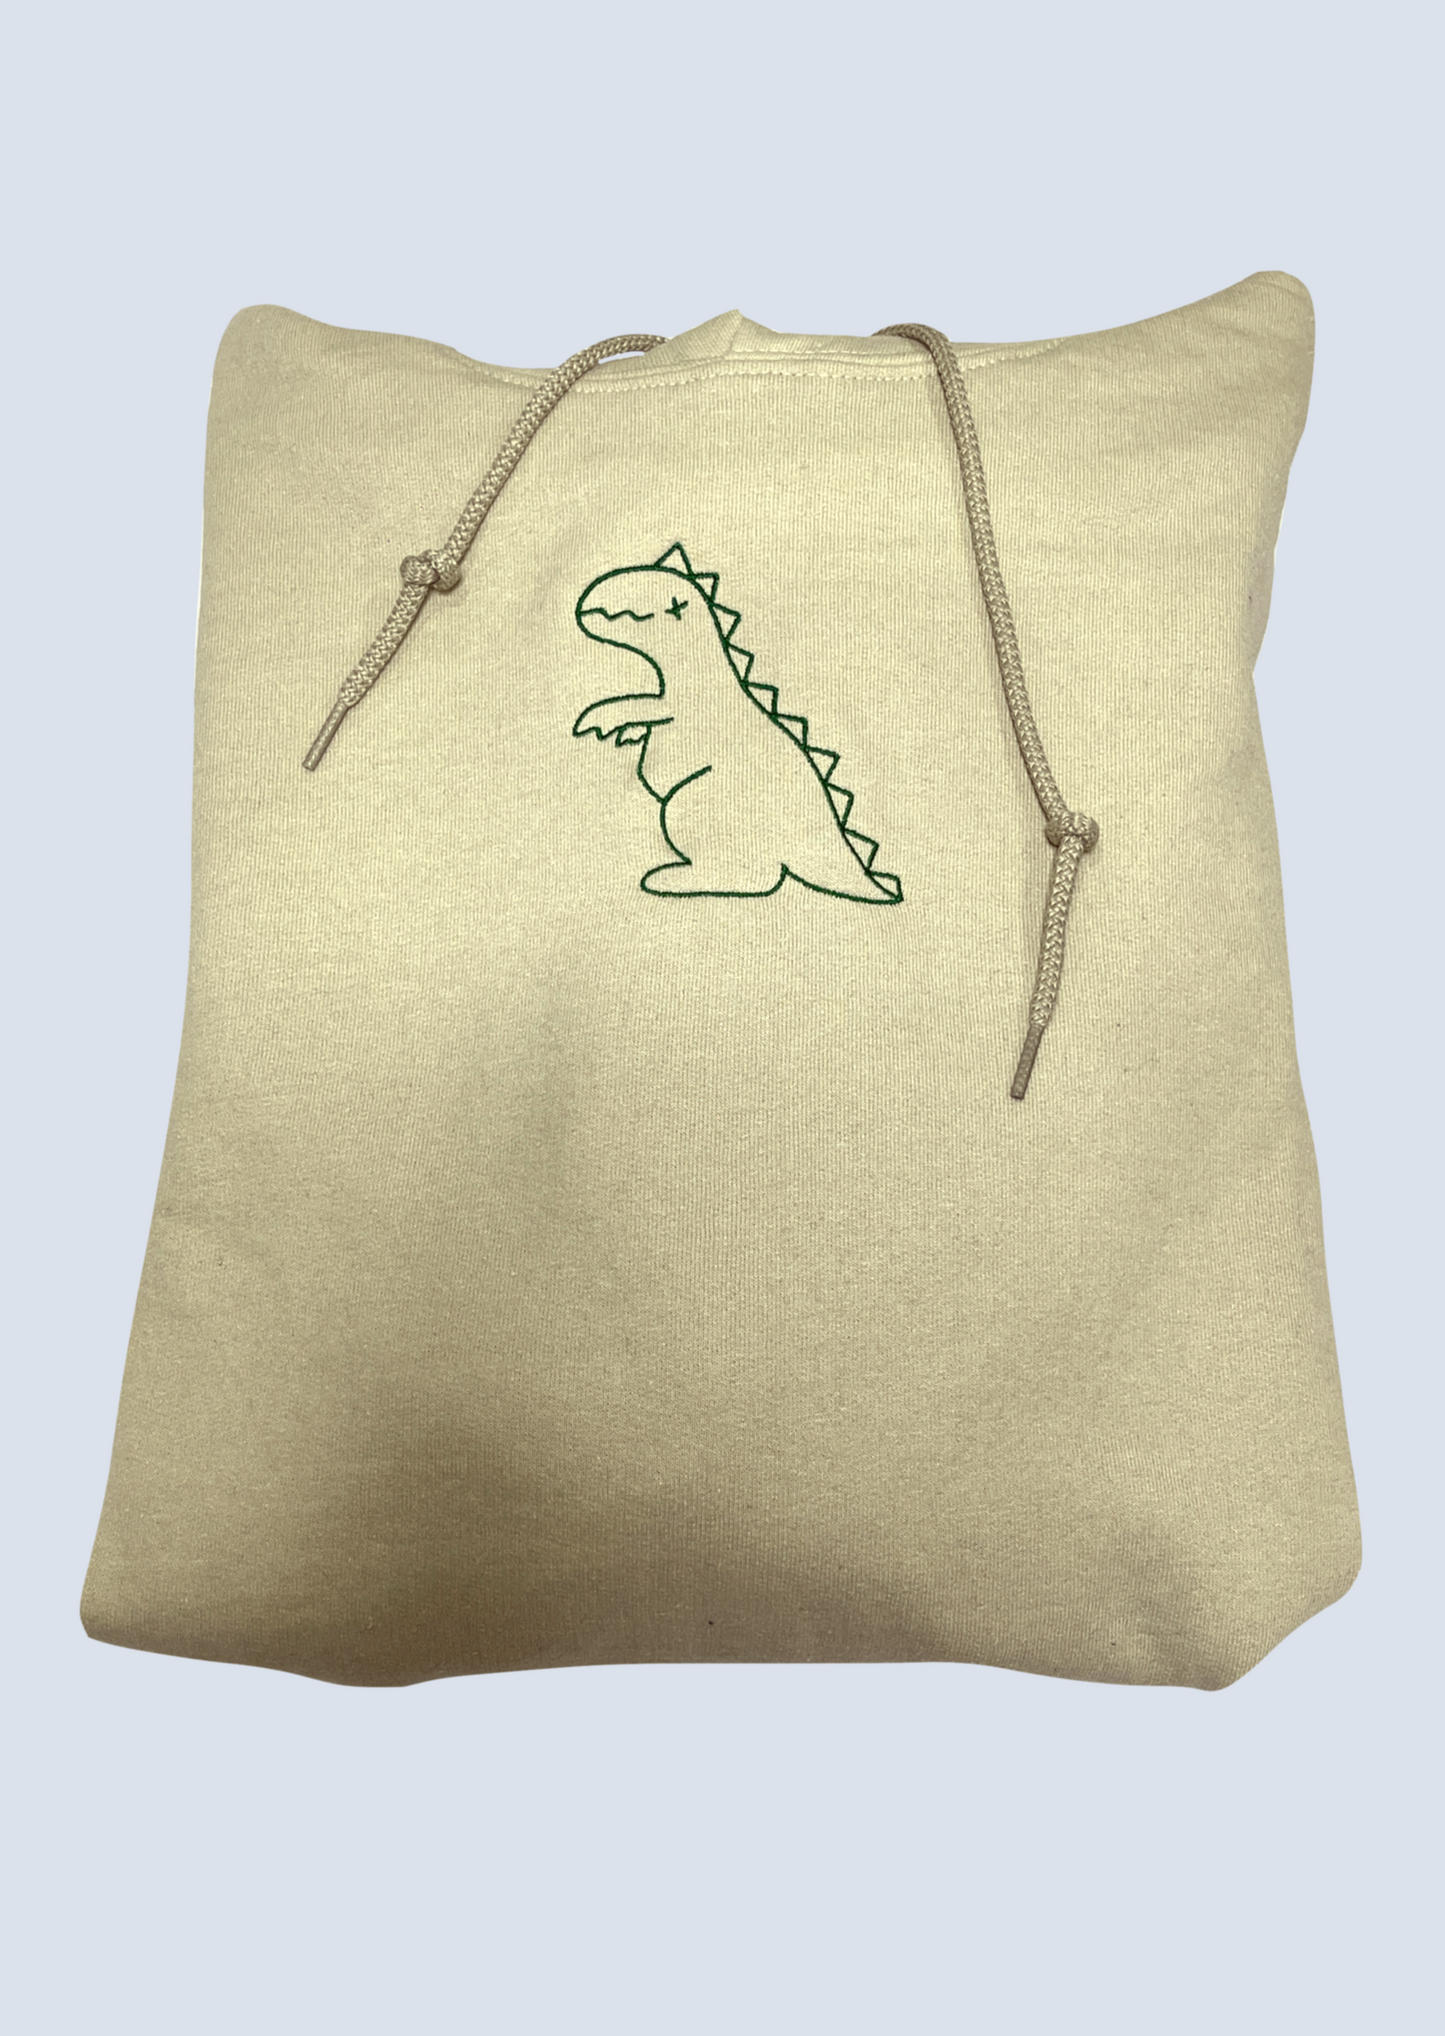 Triceratops and T-Rex Dinosaurs Embroidered Matching Set